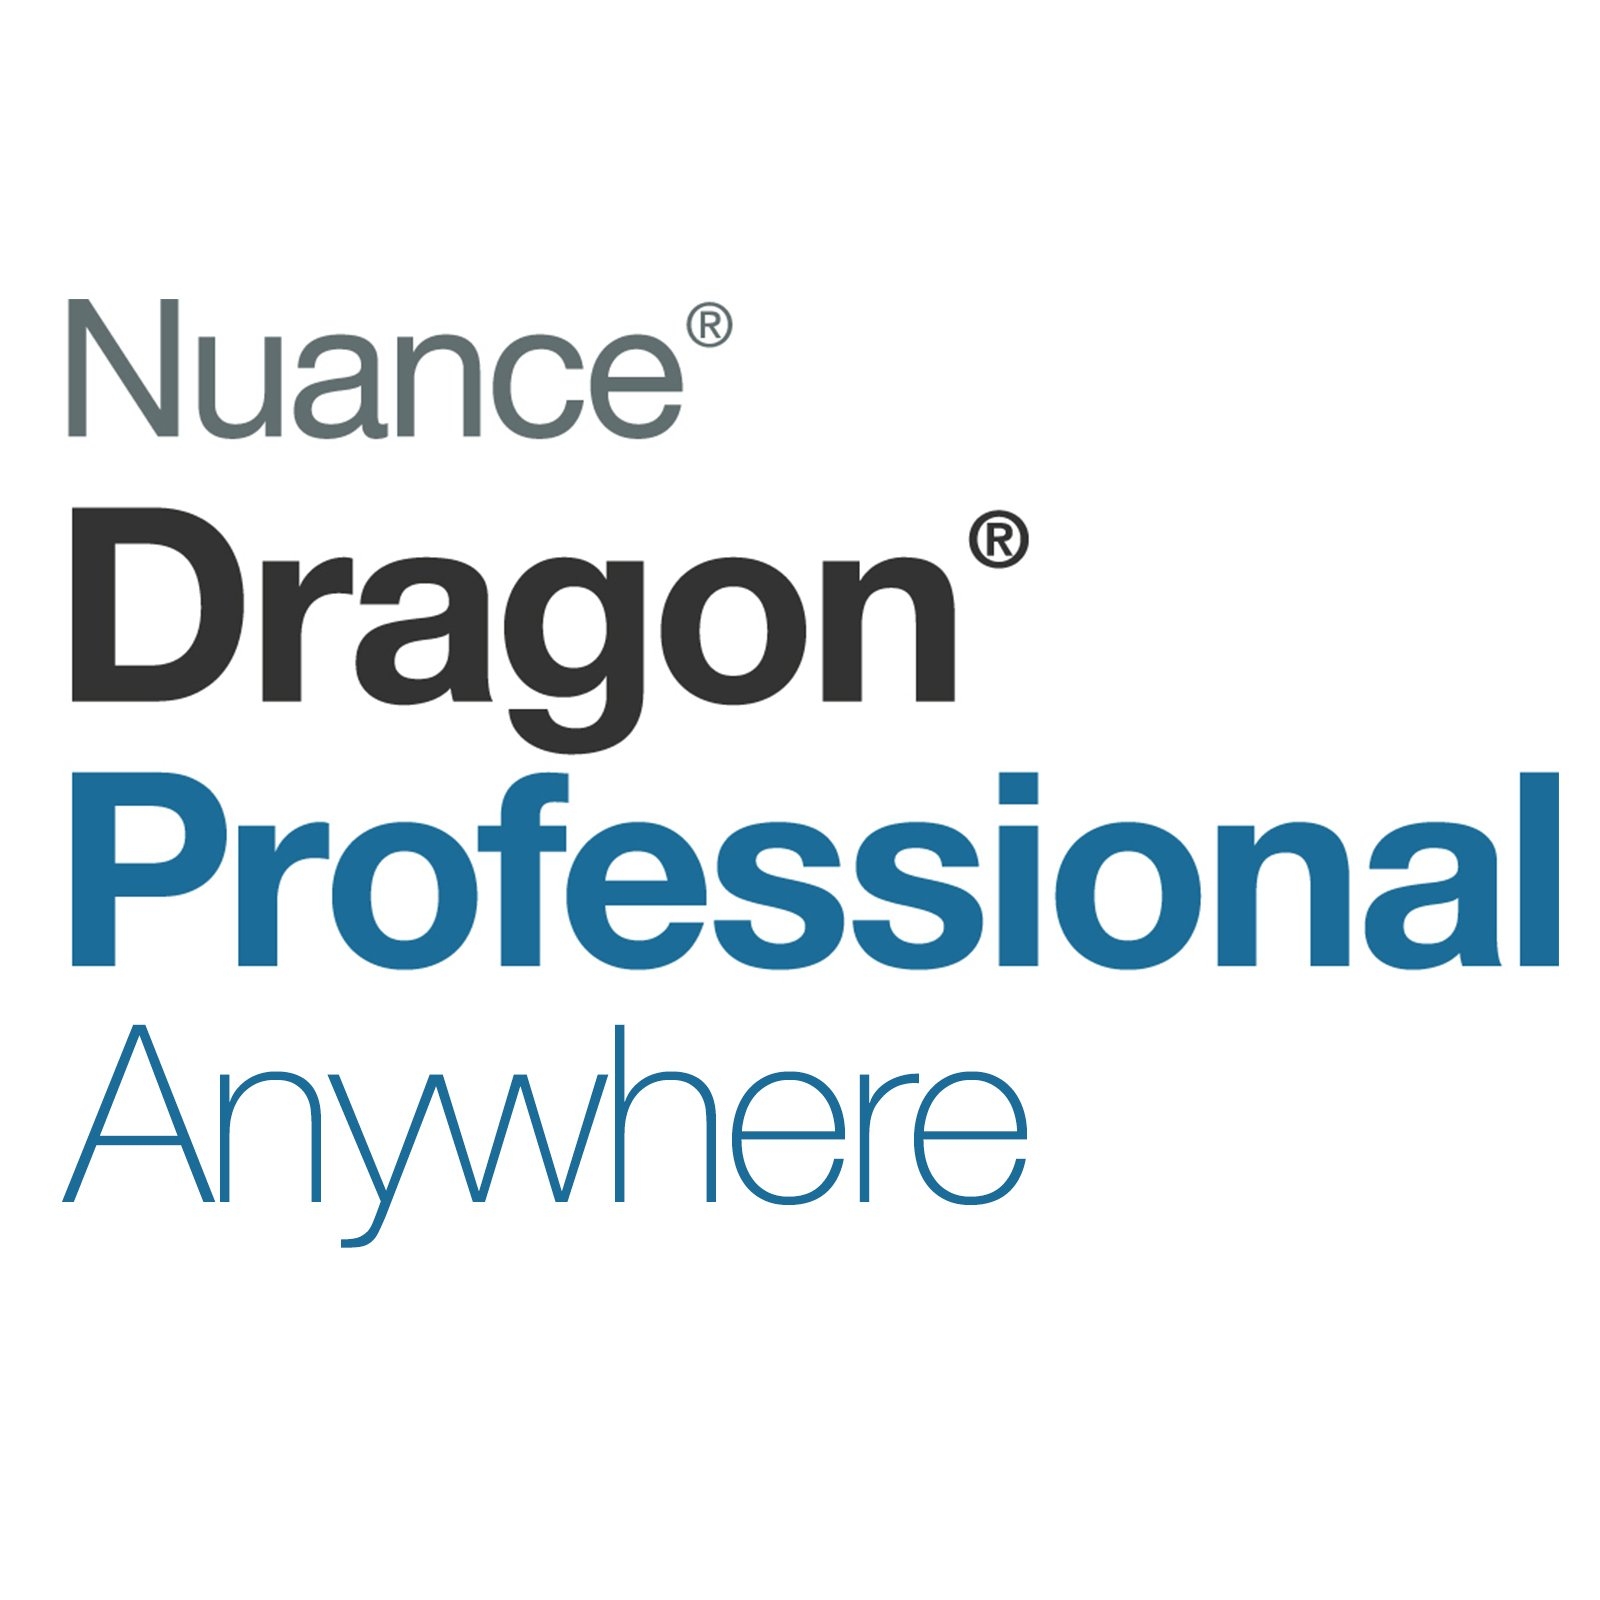 Nuance Dragon Professional Anywhere (12 Month User Subscription)